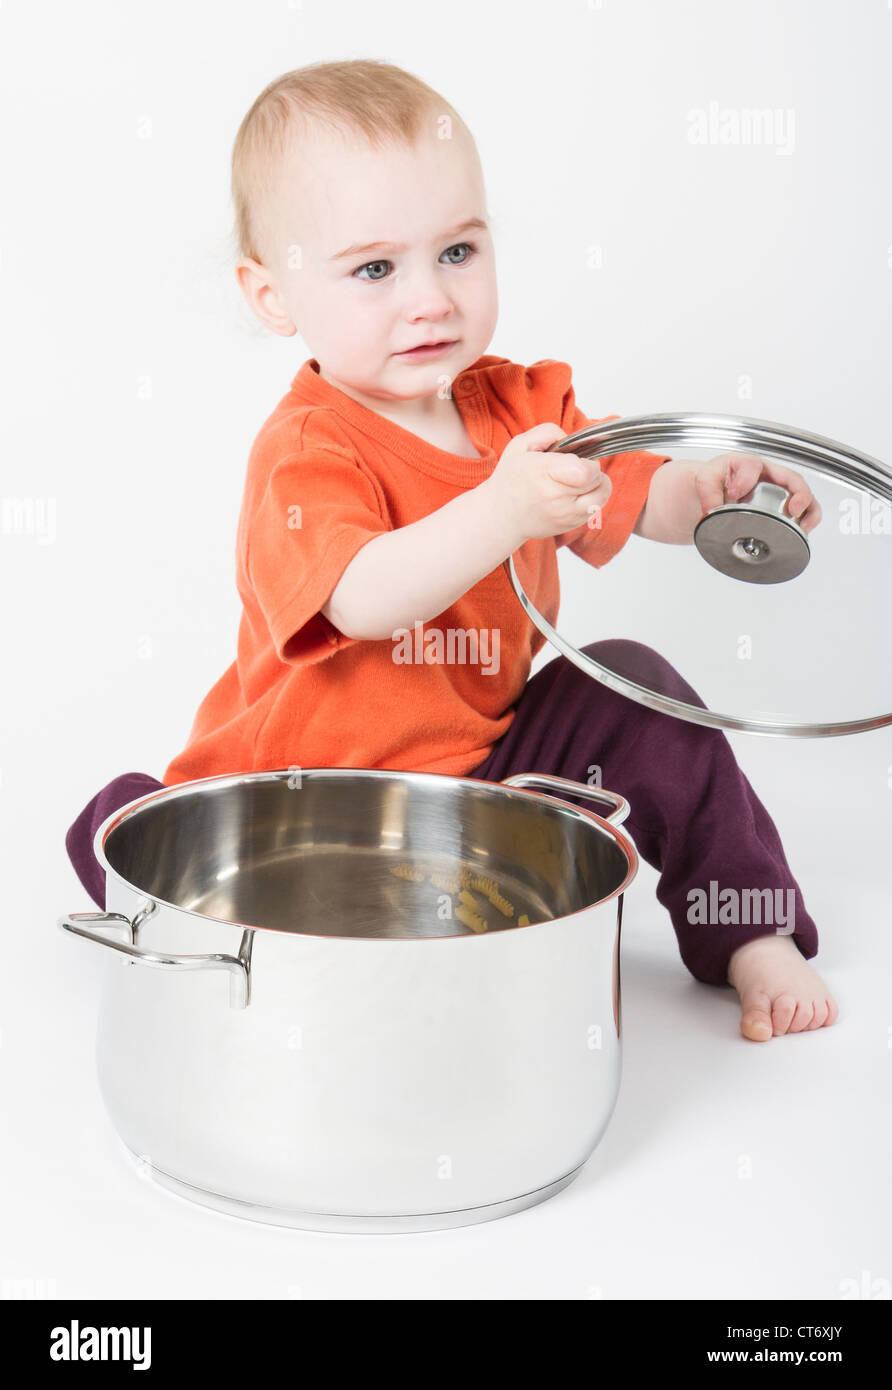 baby with big cooking pot on neutral background Stock Photo